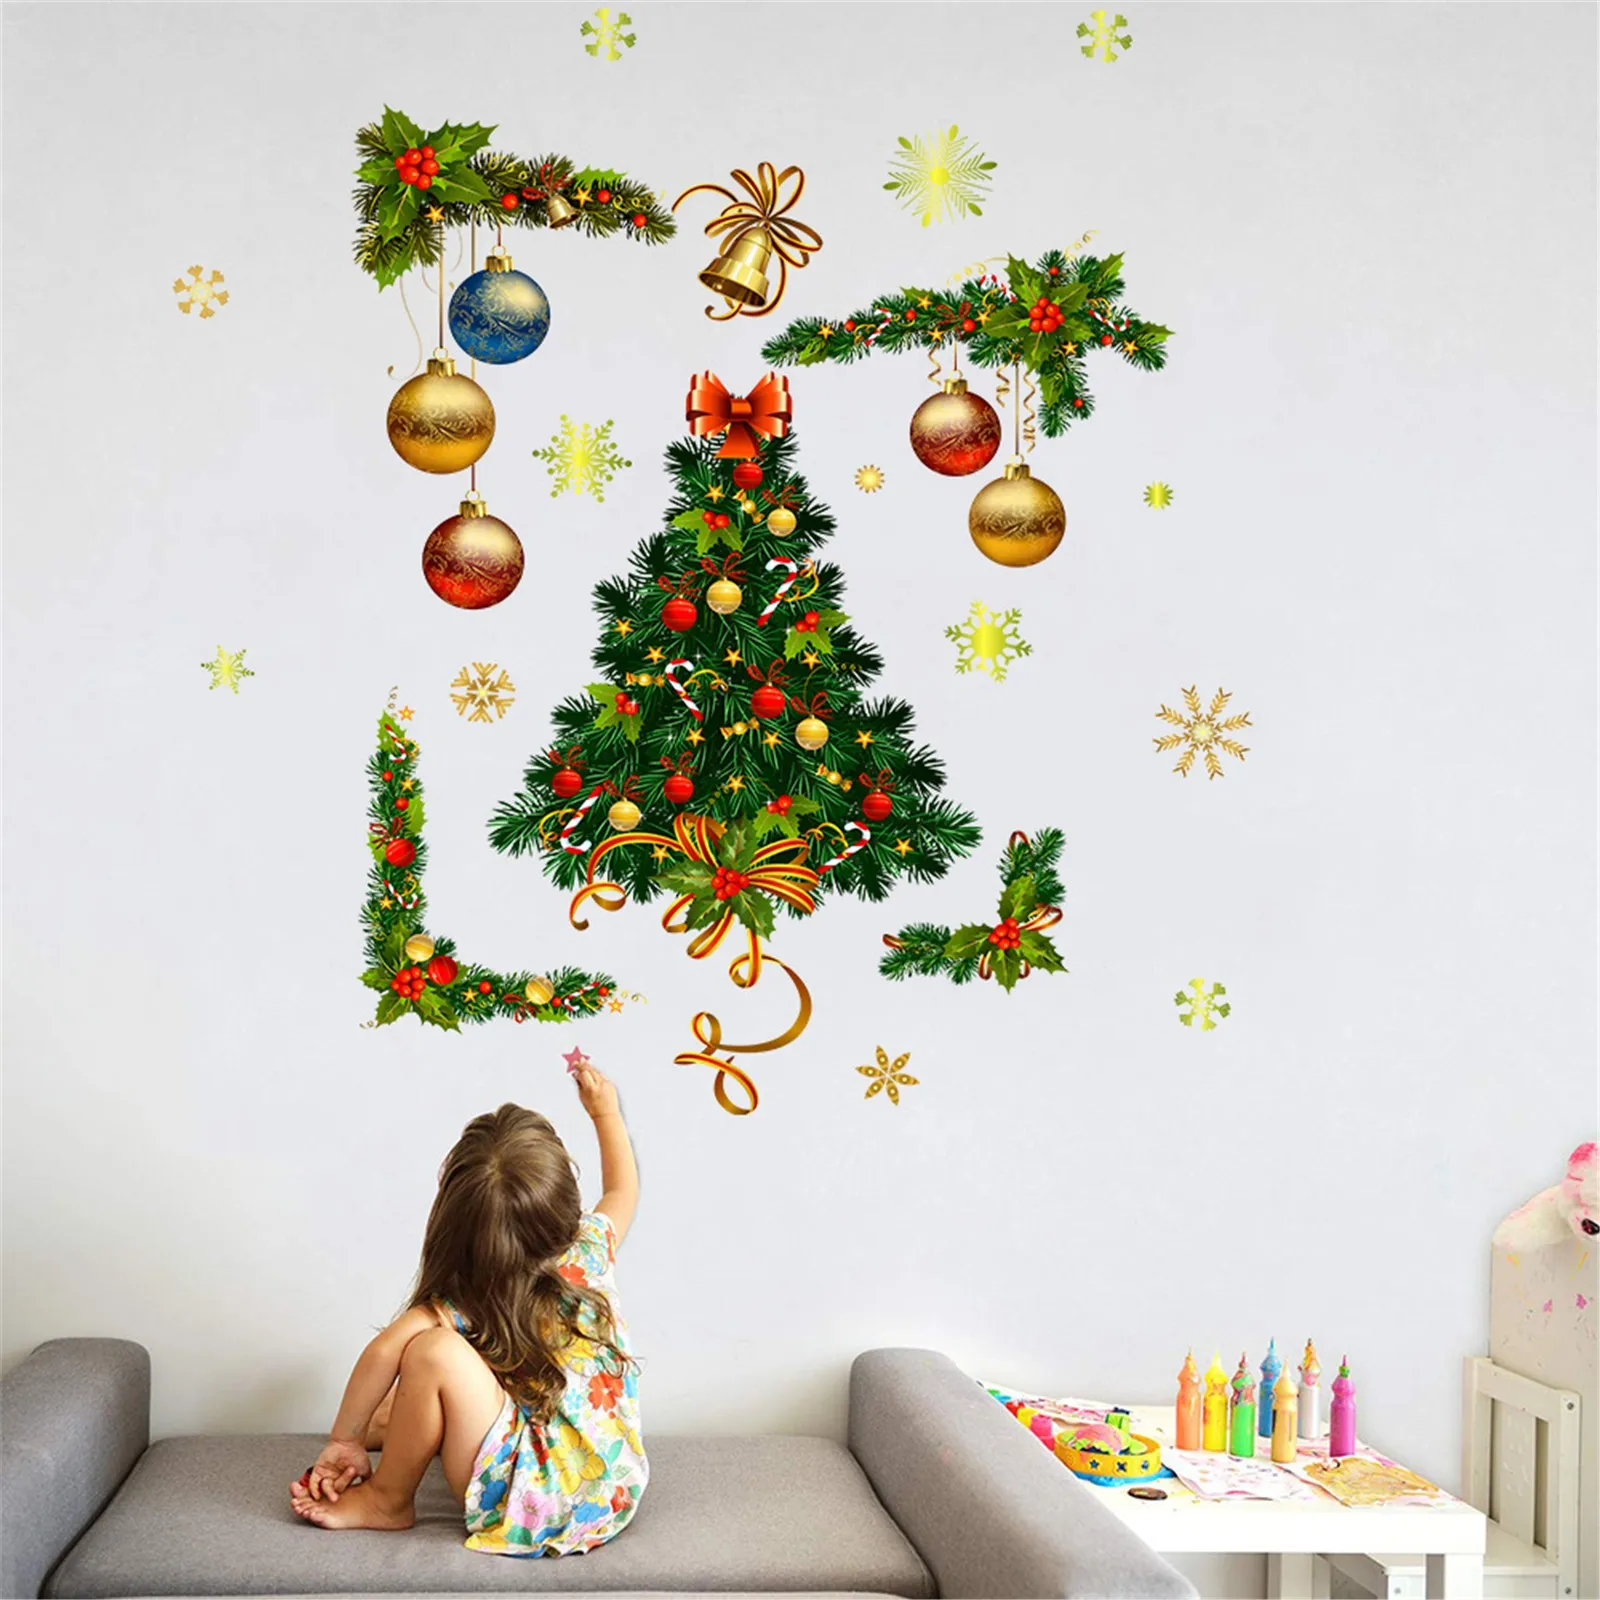 Christmas Snowman wall sticker Christmas wall decorations Snowflakes stickers